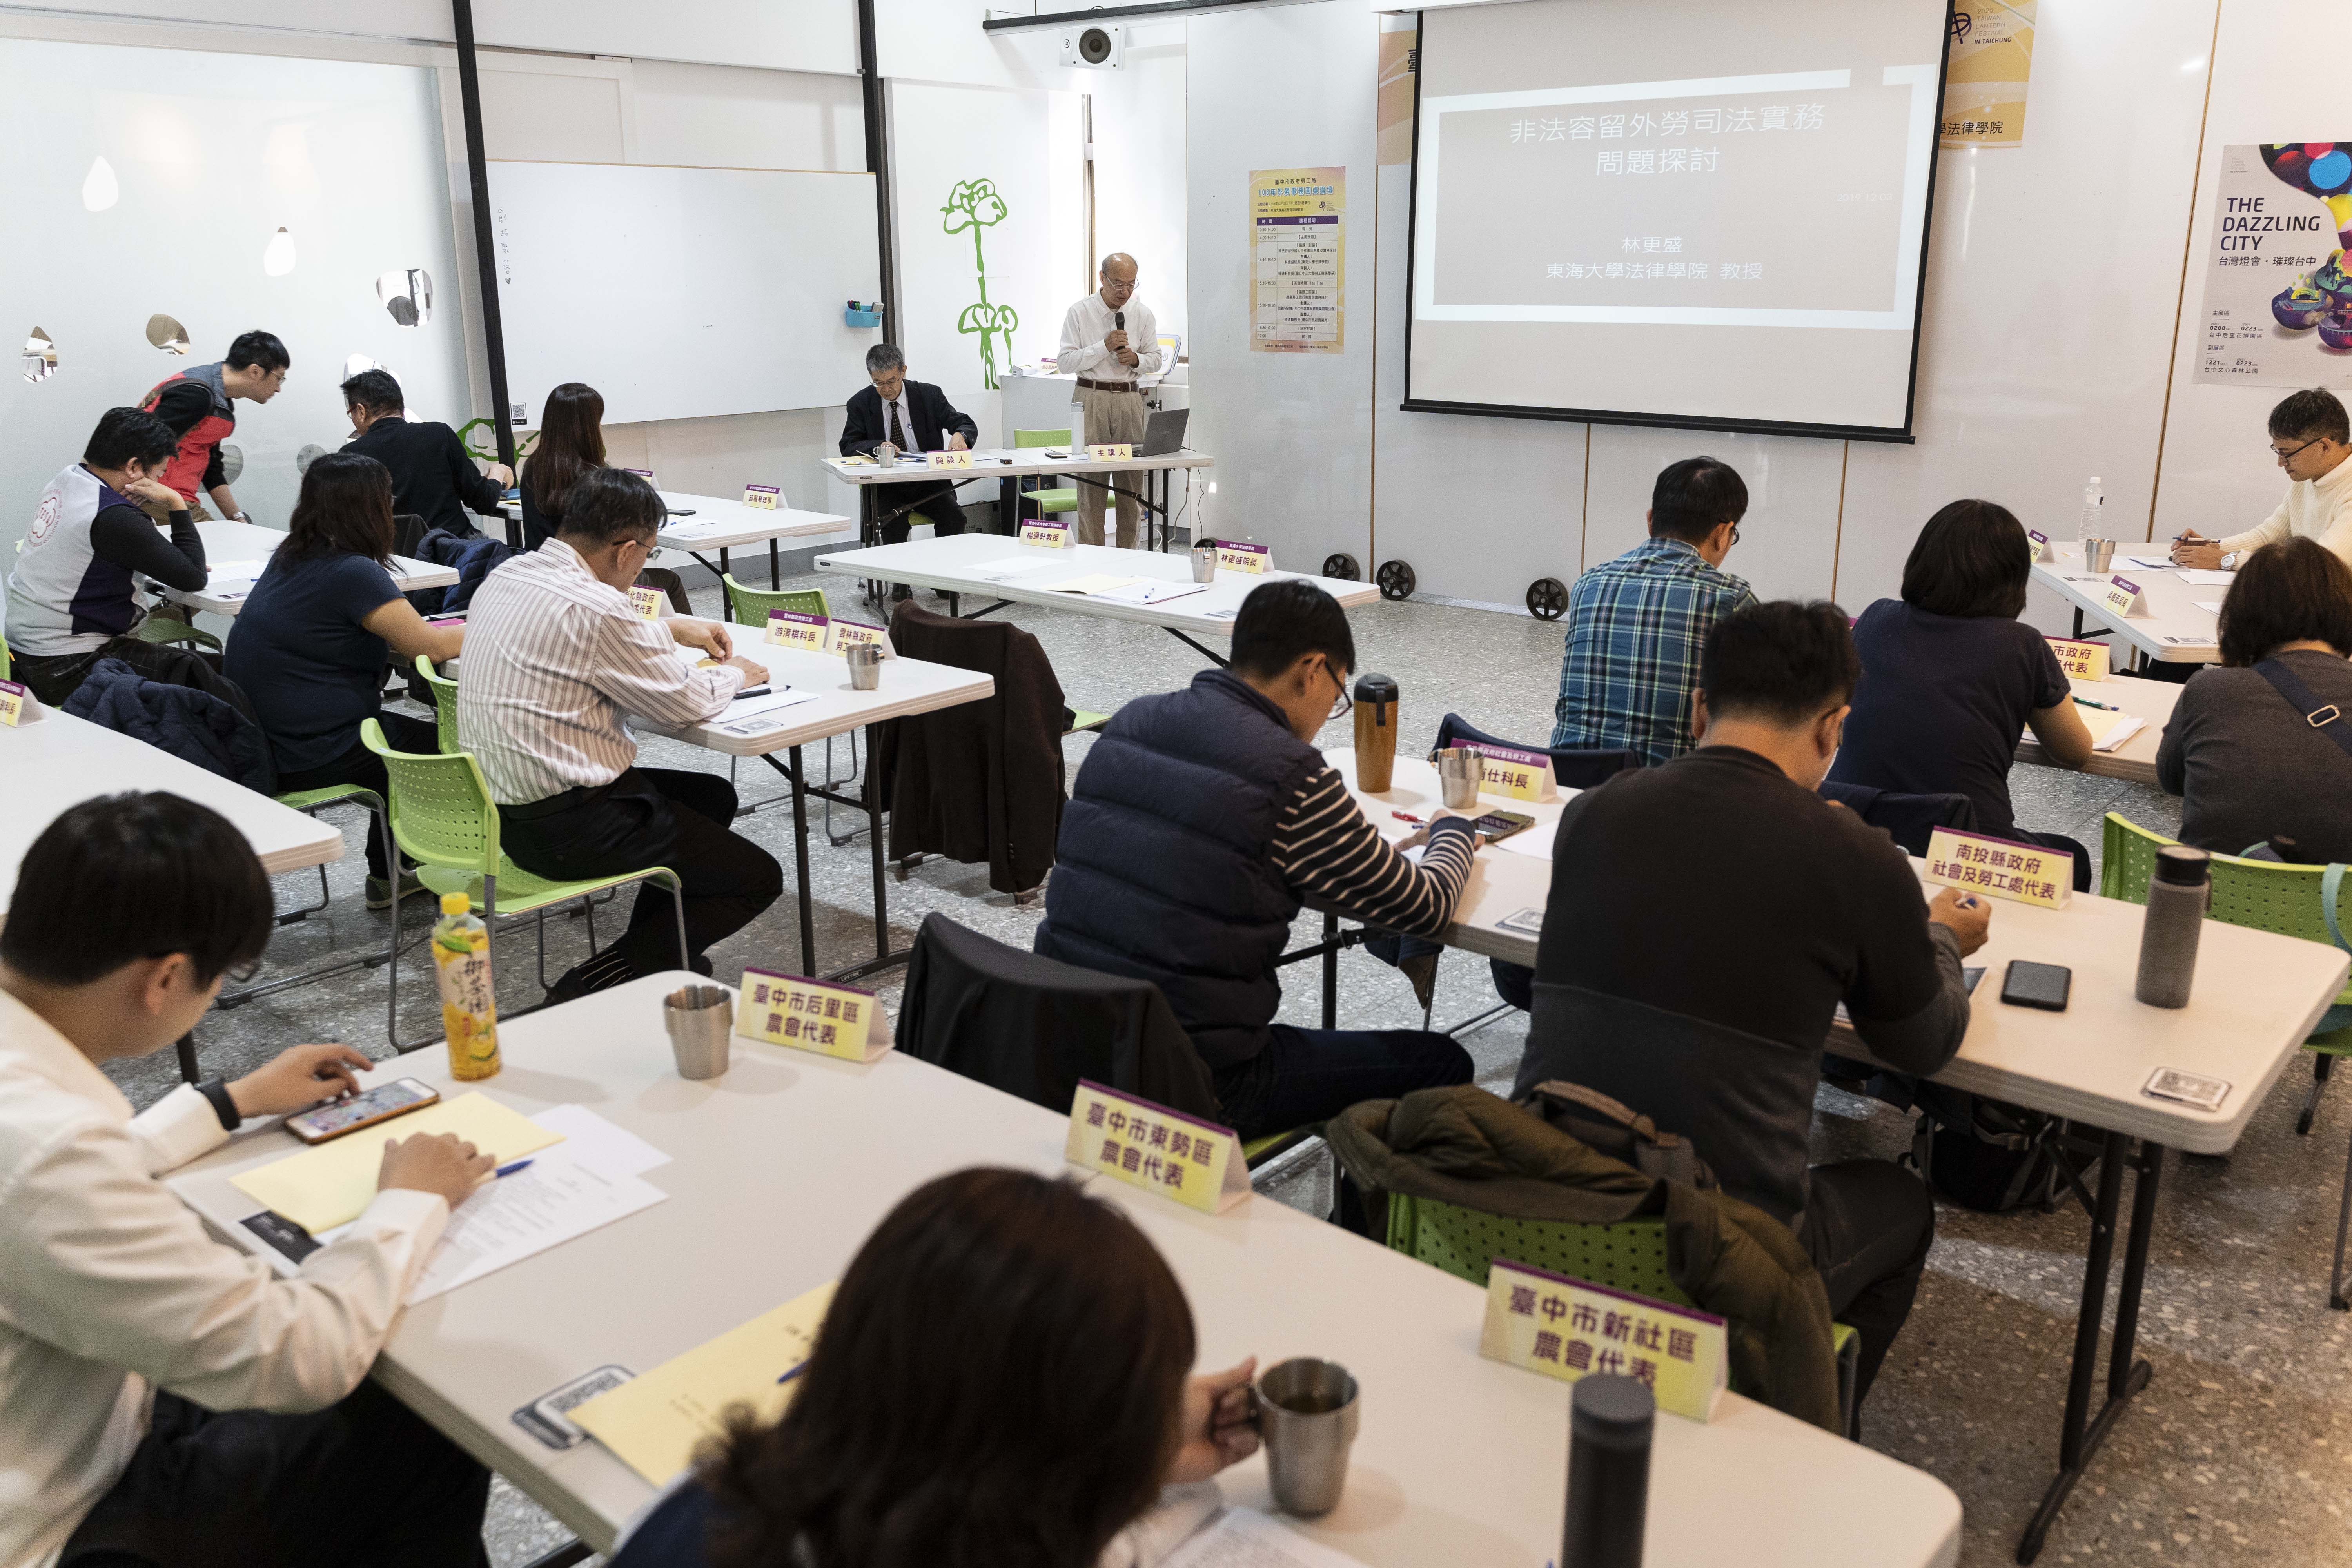 The Labor Affairs Bureau of Taichung City Government invited the government, the academic units, and other relevant units of industry to discuss the policies for migrant workers to improve the relevant system of employment for migrant workers in Taiwan.